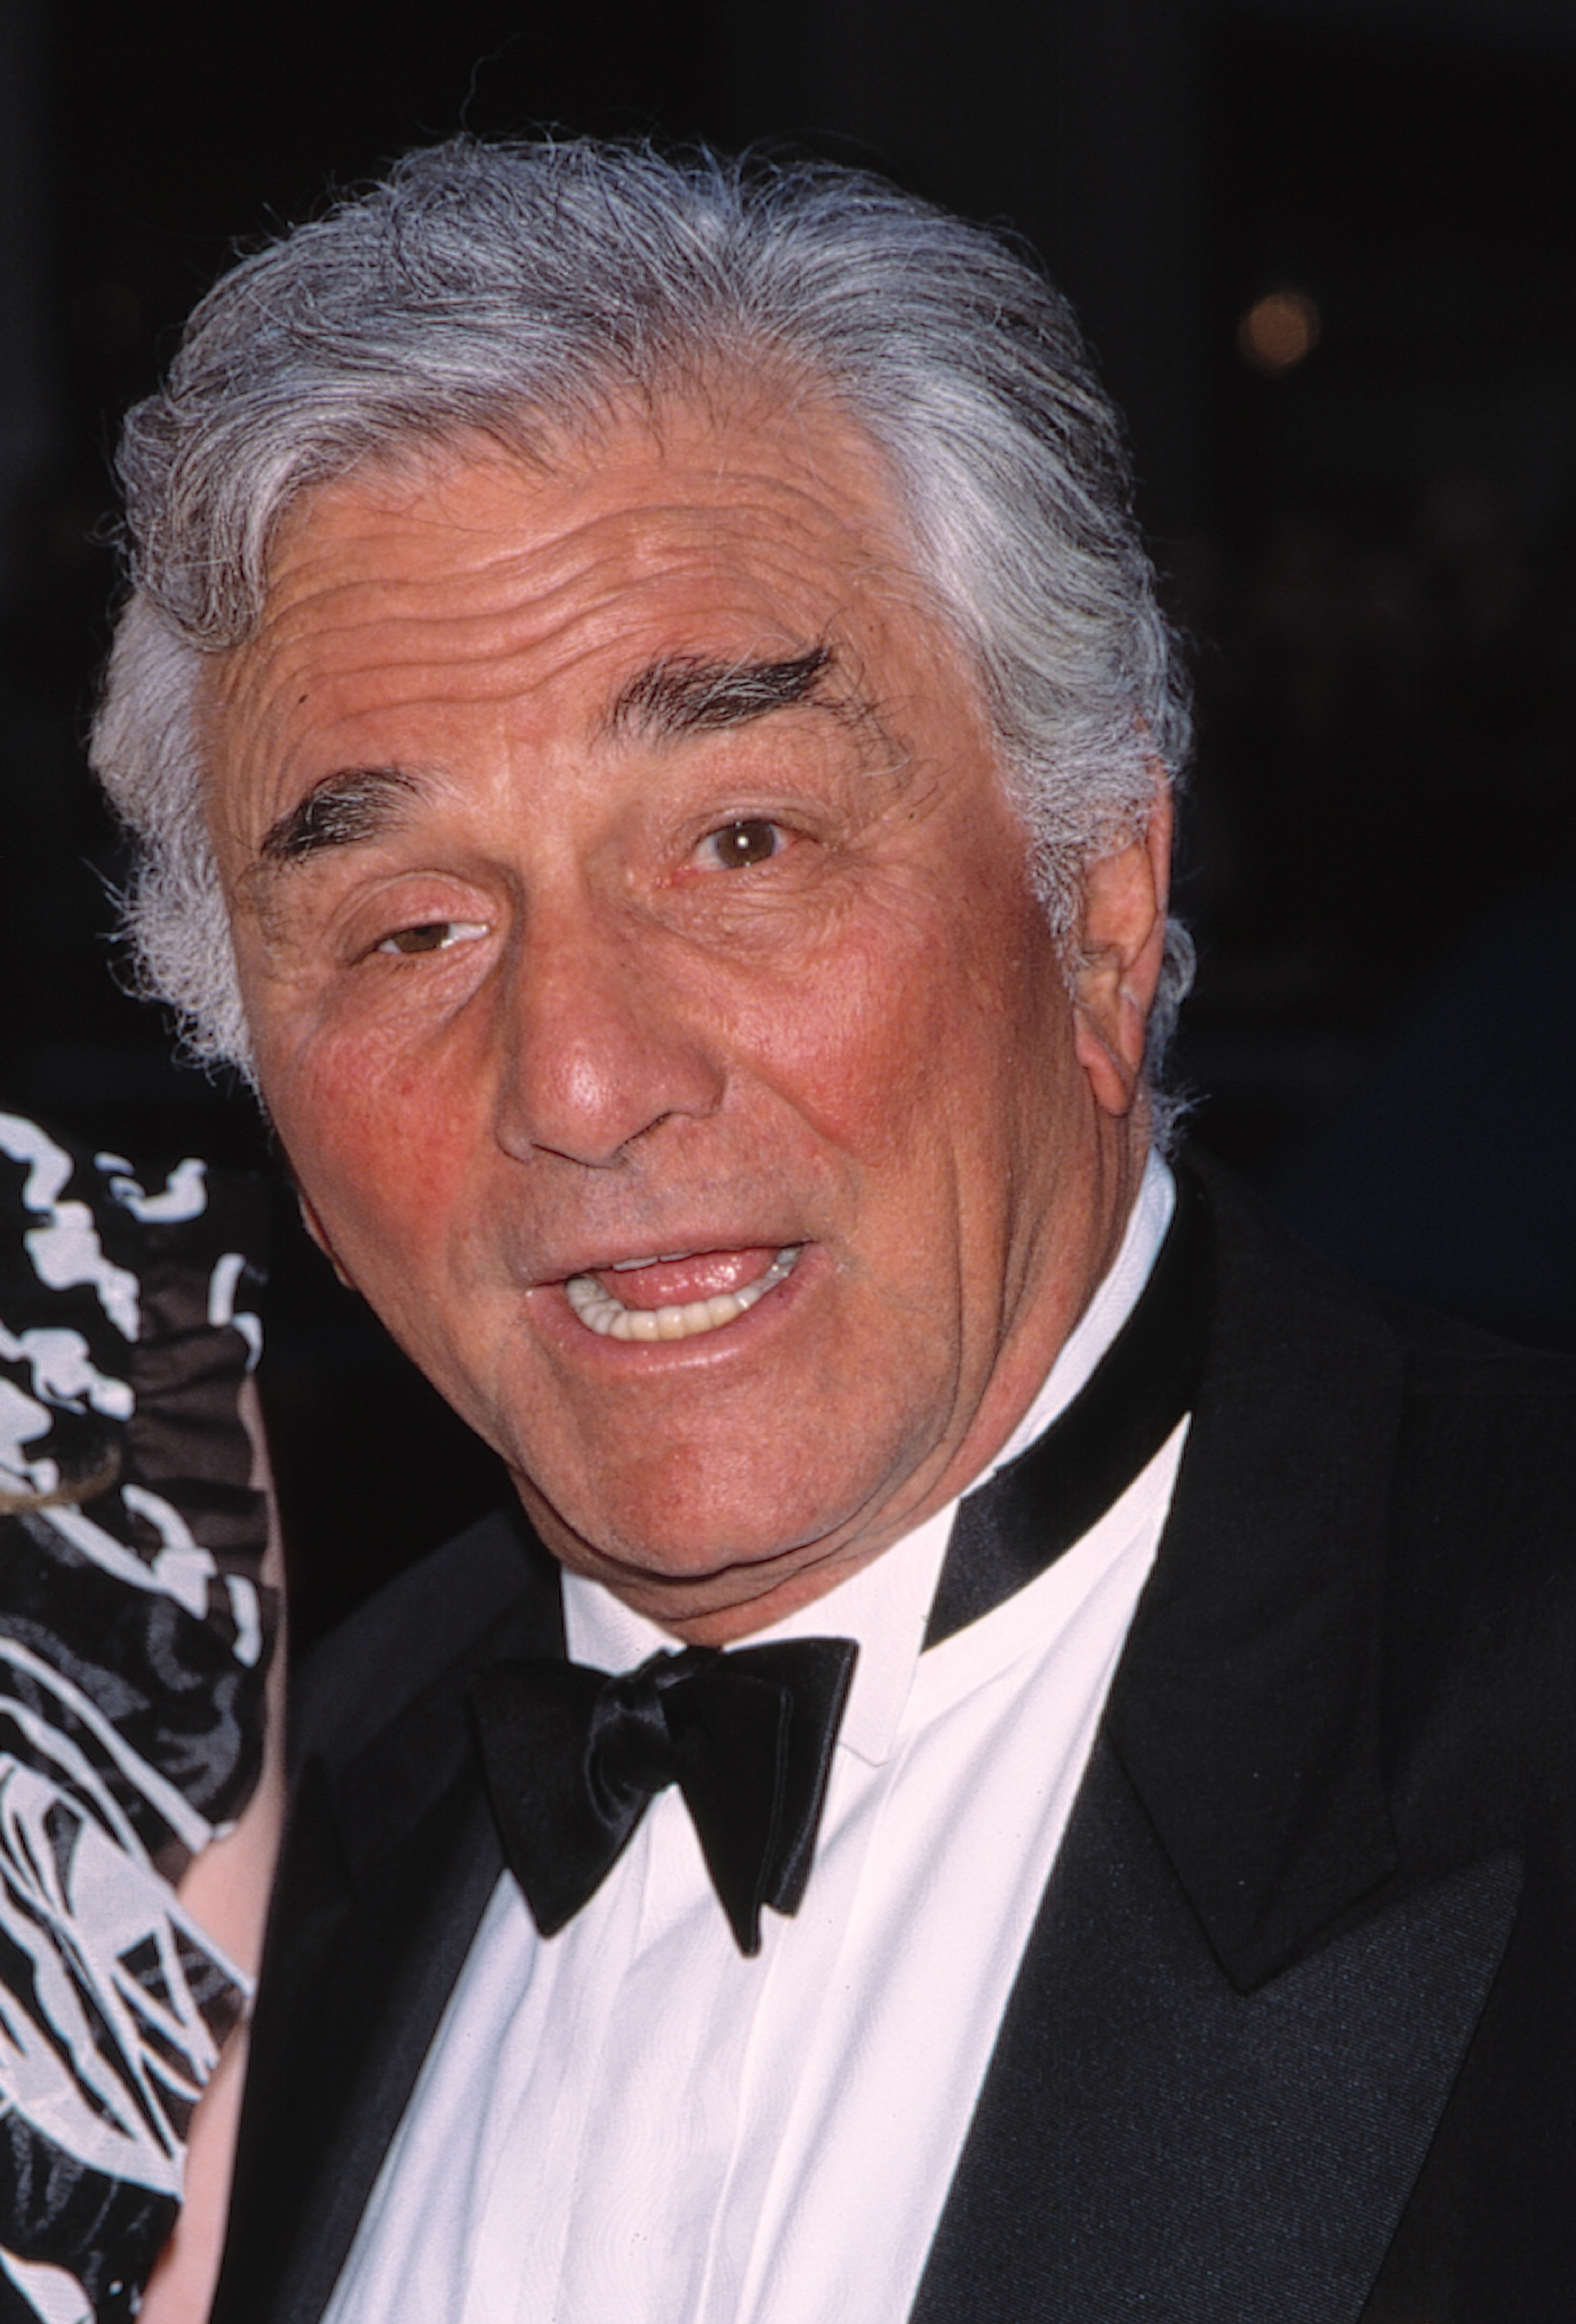 Peter Falk during the 2002 NBC 75th Anniversary in New York City. | Source: Getty Images